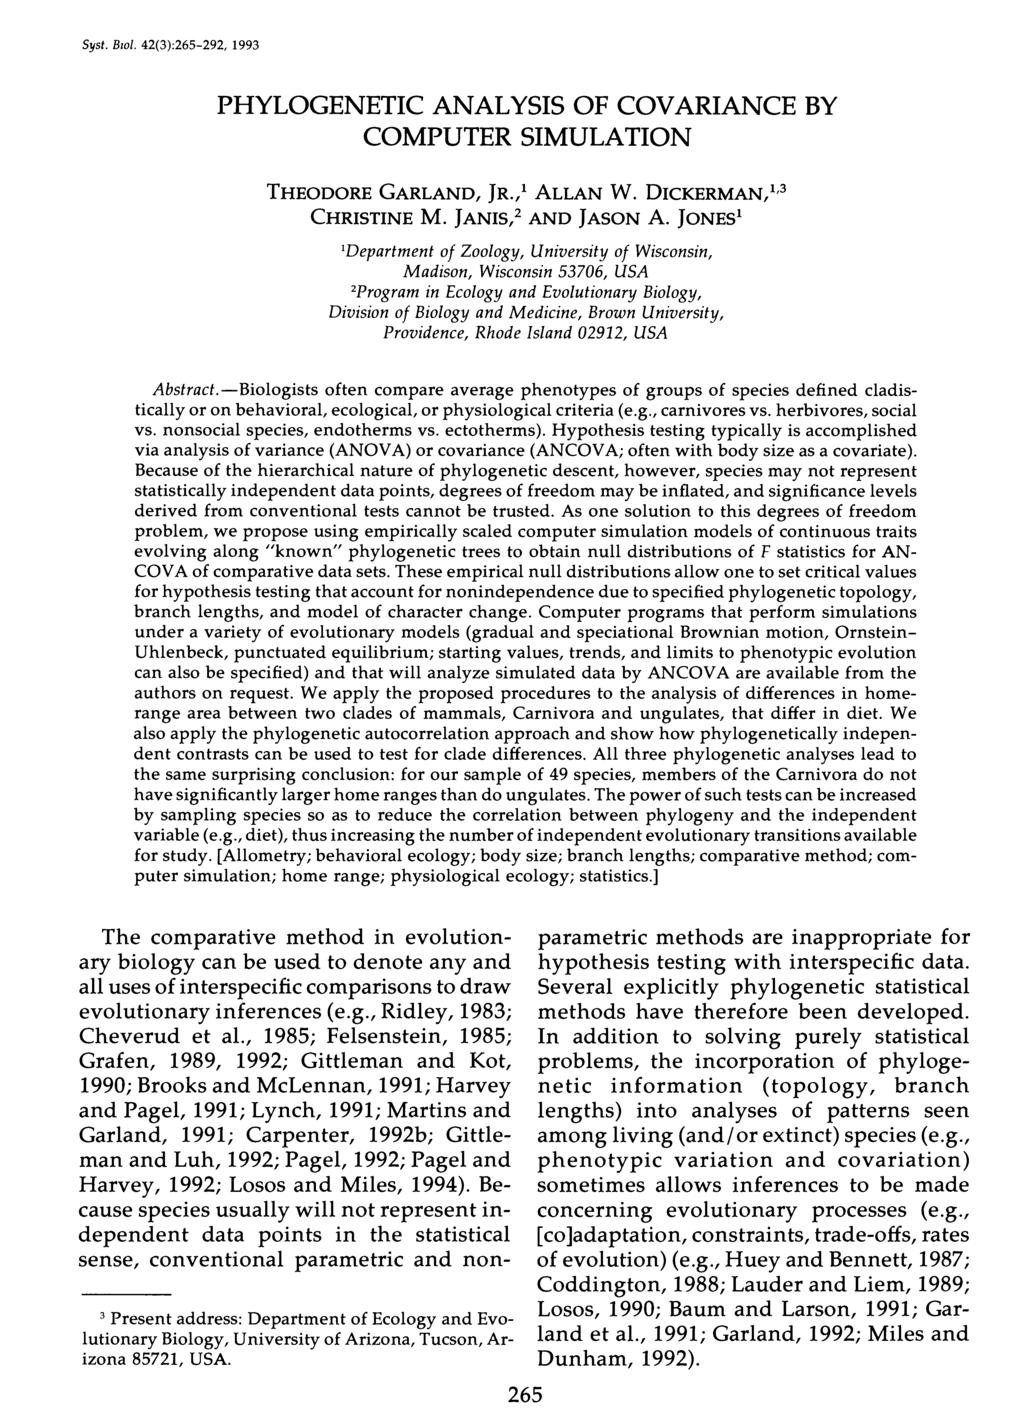 PHYLOGENETIC ANALYSIS OF COVARIANCE BY COMPUTER SIMULATION THEODORE GARLAND, JR.,' ALLAN W. DICKER MAN,',^ CHRISTINE M. JAN IS,^ AND JASON A.